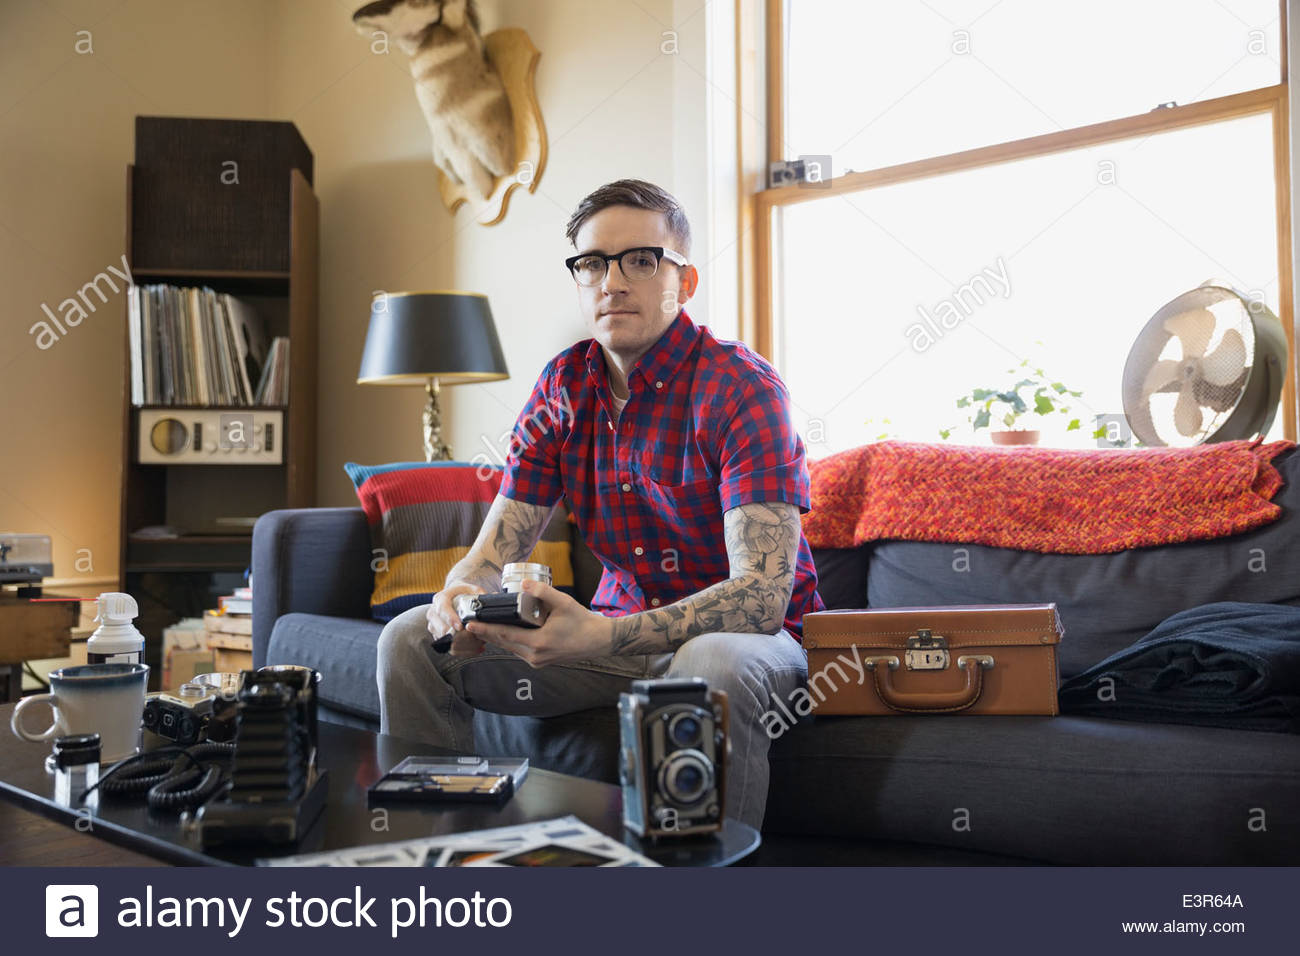 Portrait of serious man with antique cameras Stock Photo